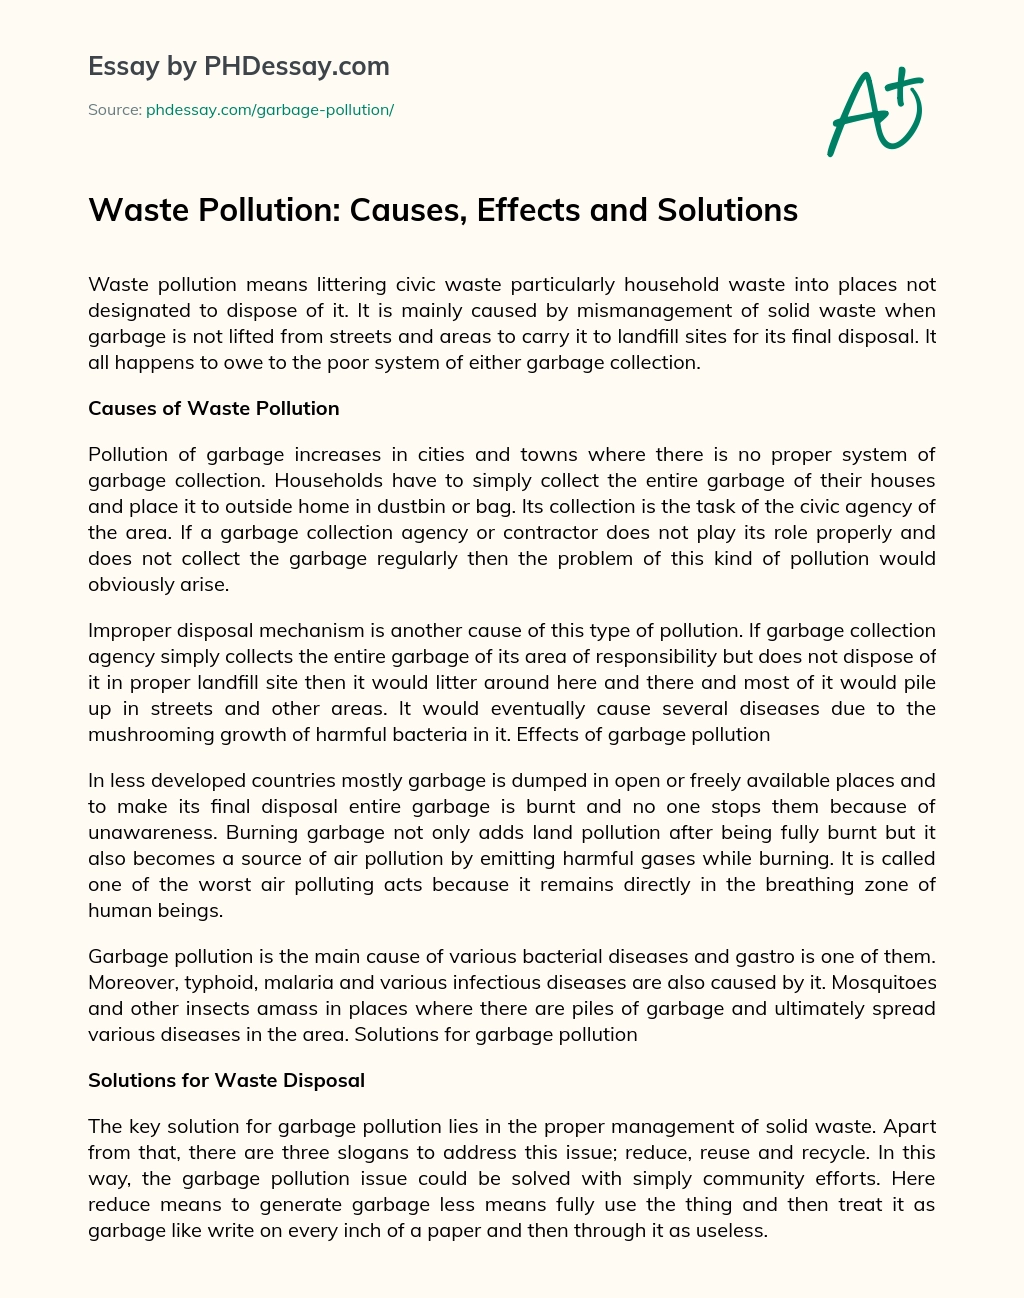 Waste Pollution: Causes, Effects and Solutions essay